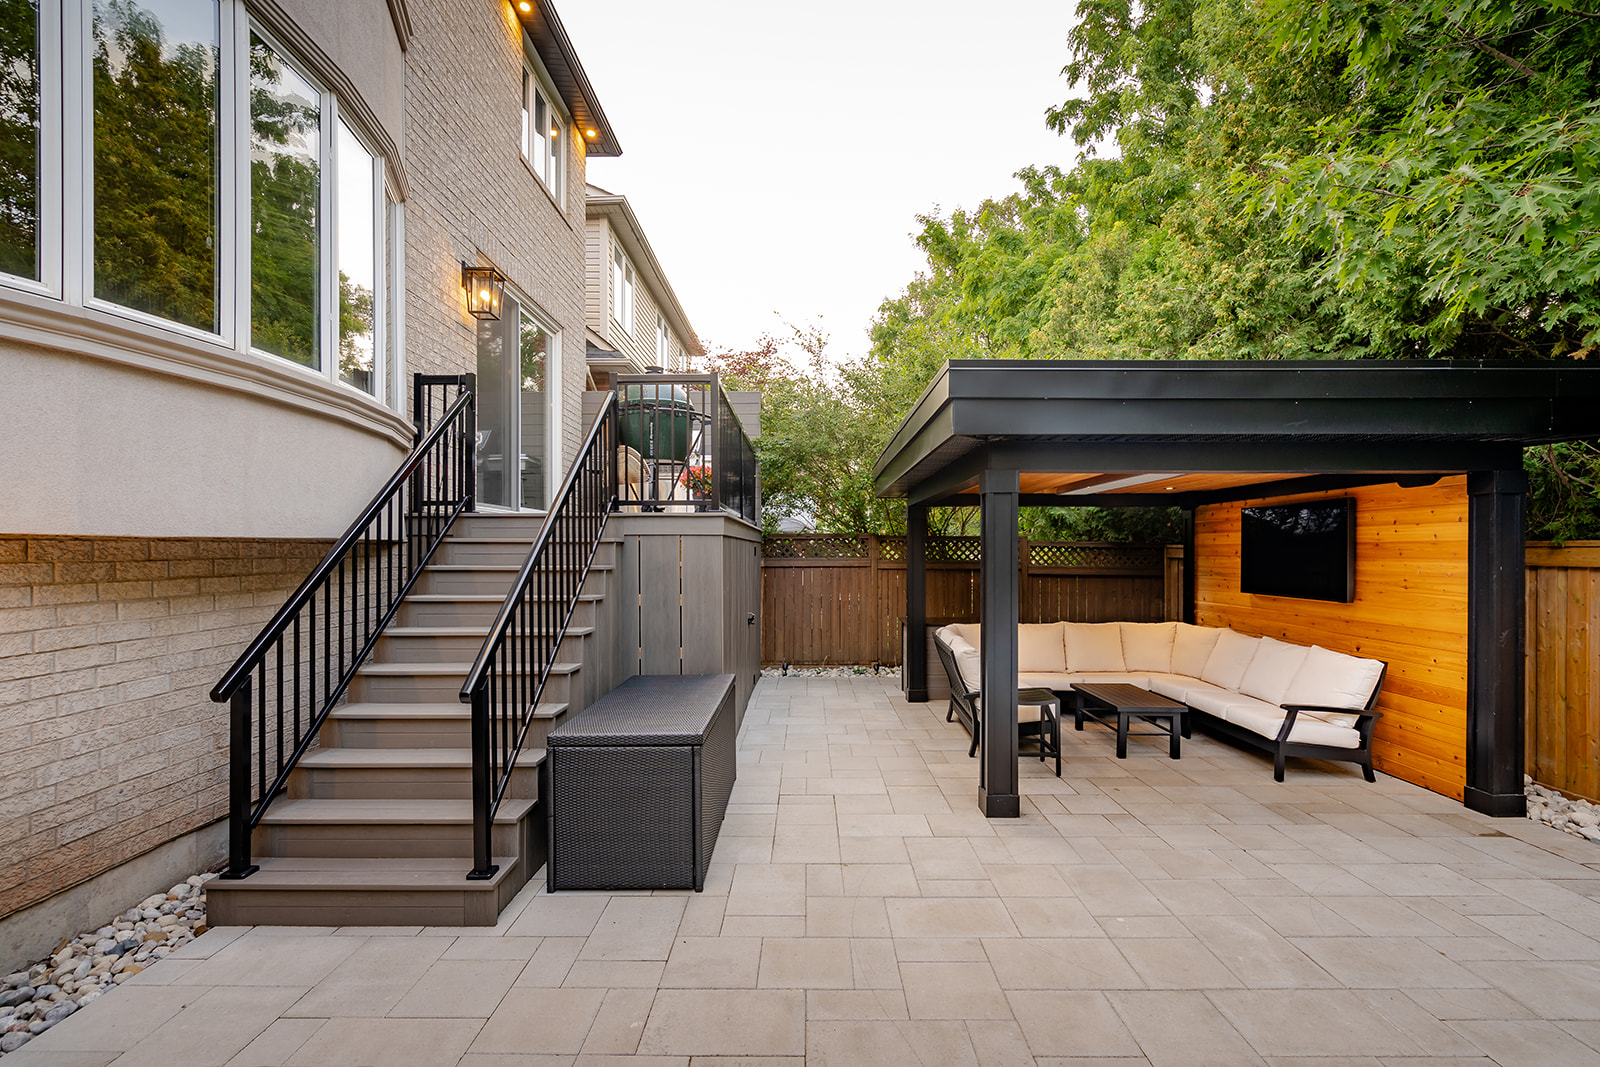 An outdoor seating area underneath a gazebo and stairs leading up to the house.